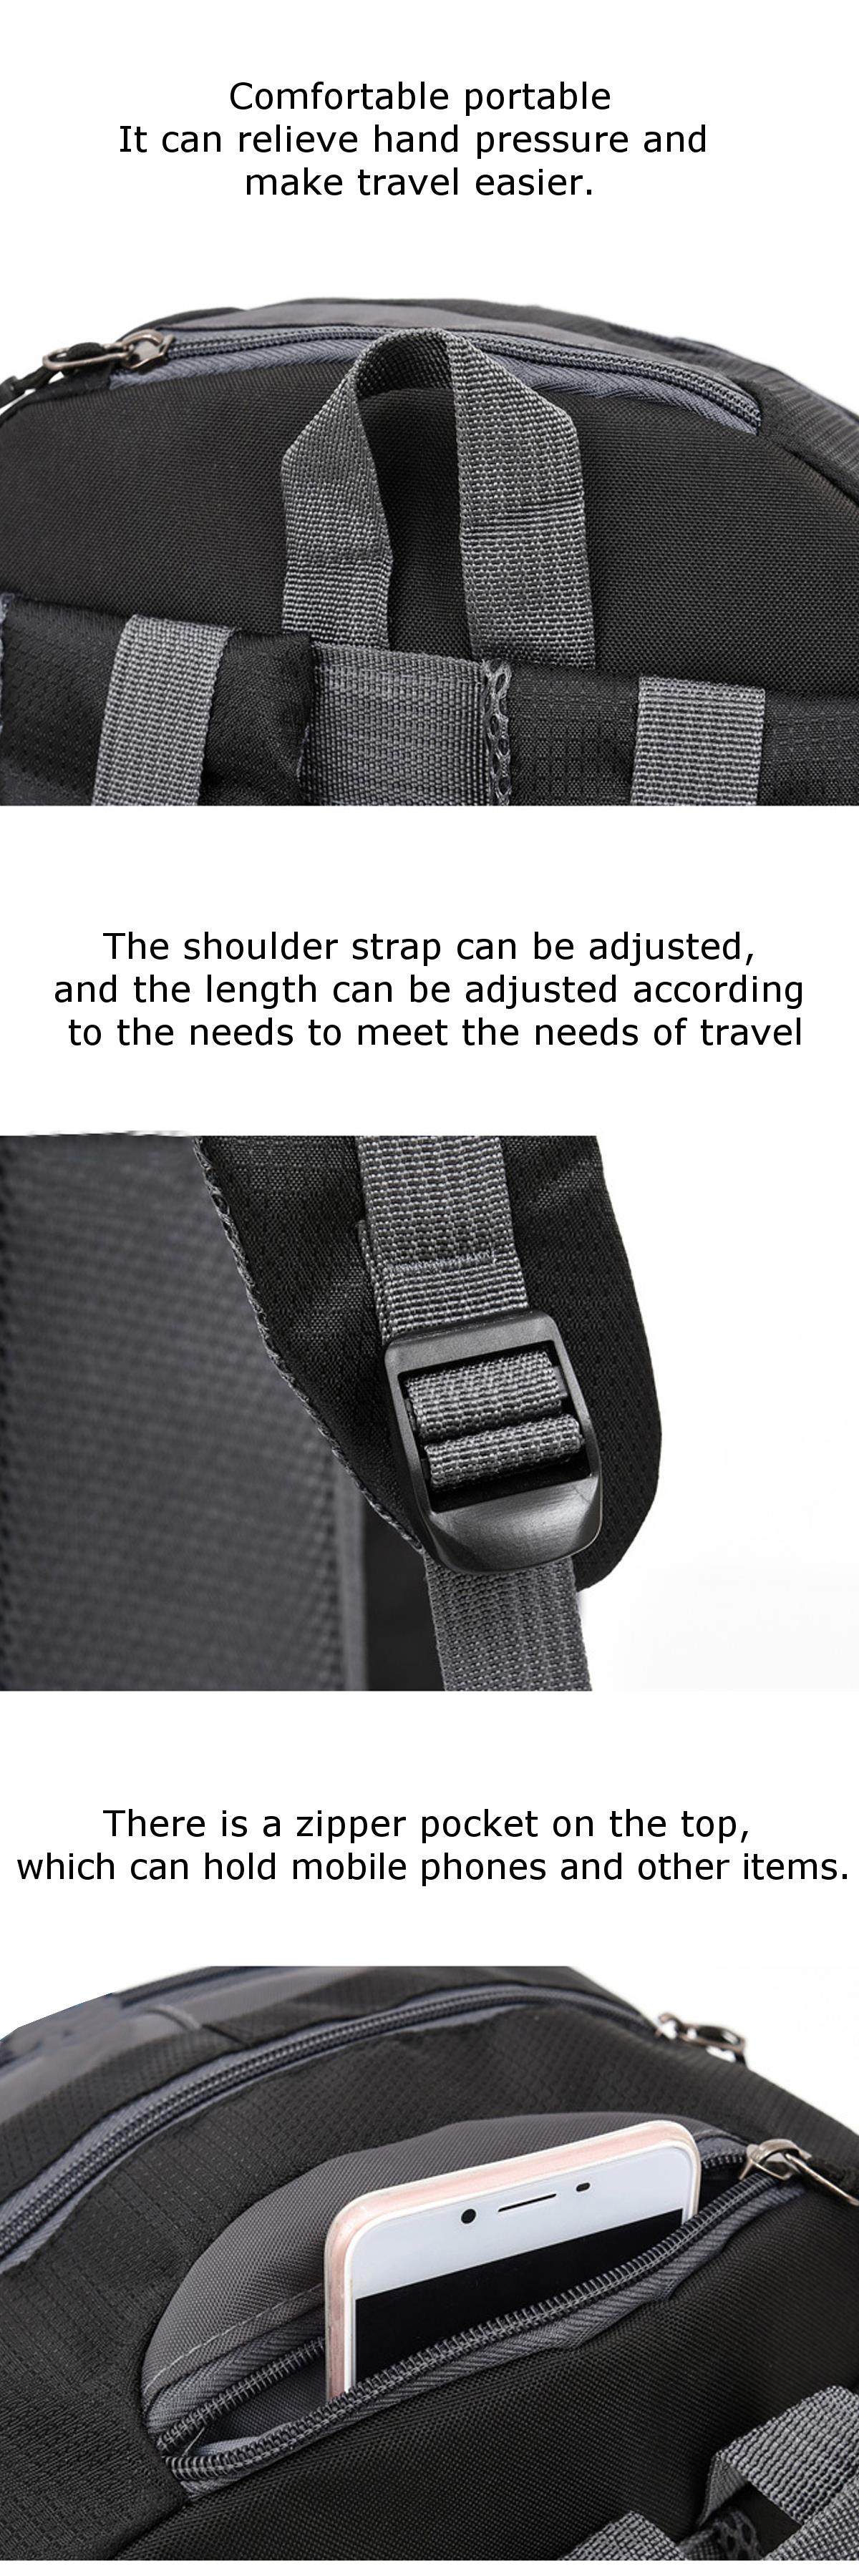 Backpack-Outdoor-Mountaineering-Bag-Laptop-Bag-Travel-Shoulders-Storage-Bag-with-USB-for-16inch-Note-1746586